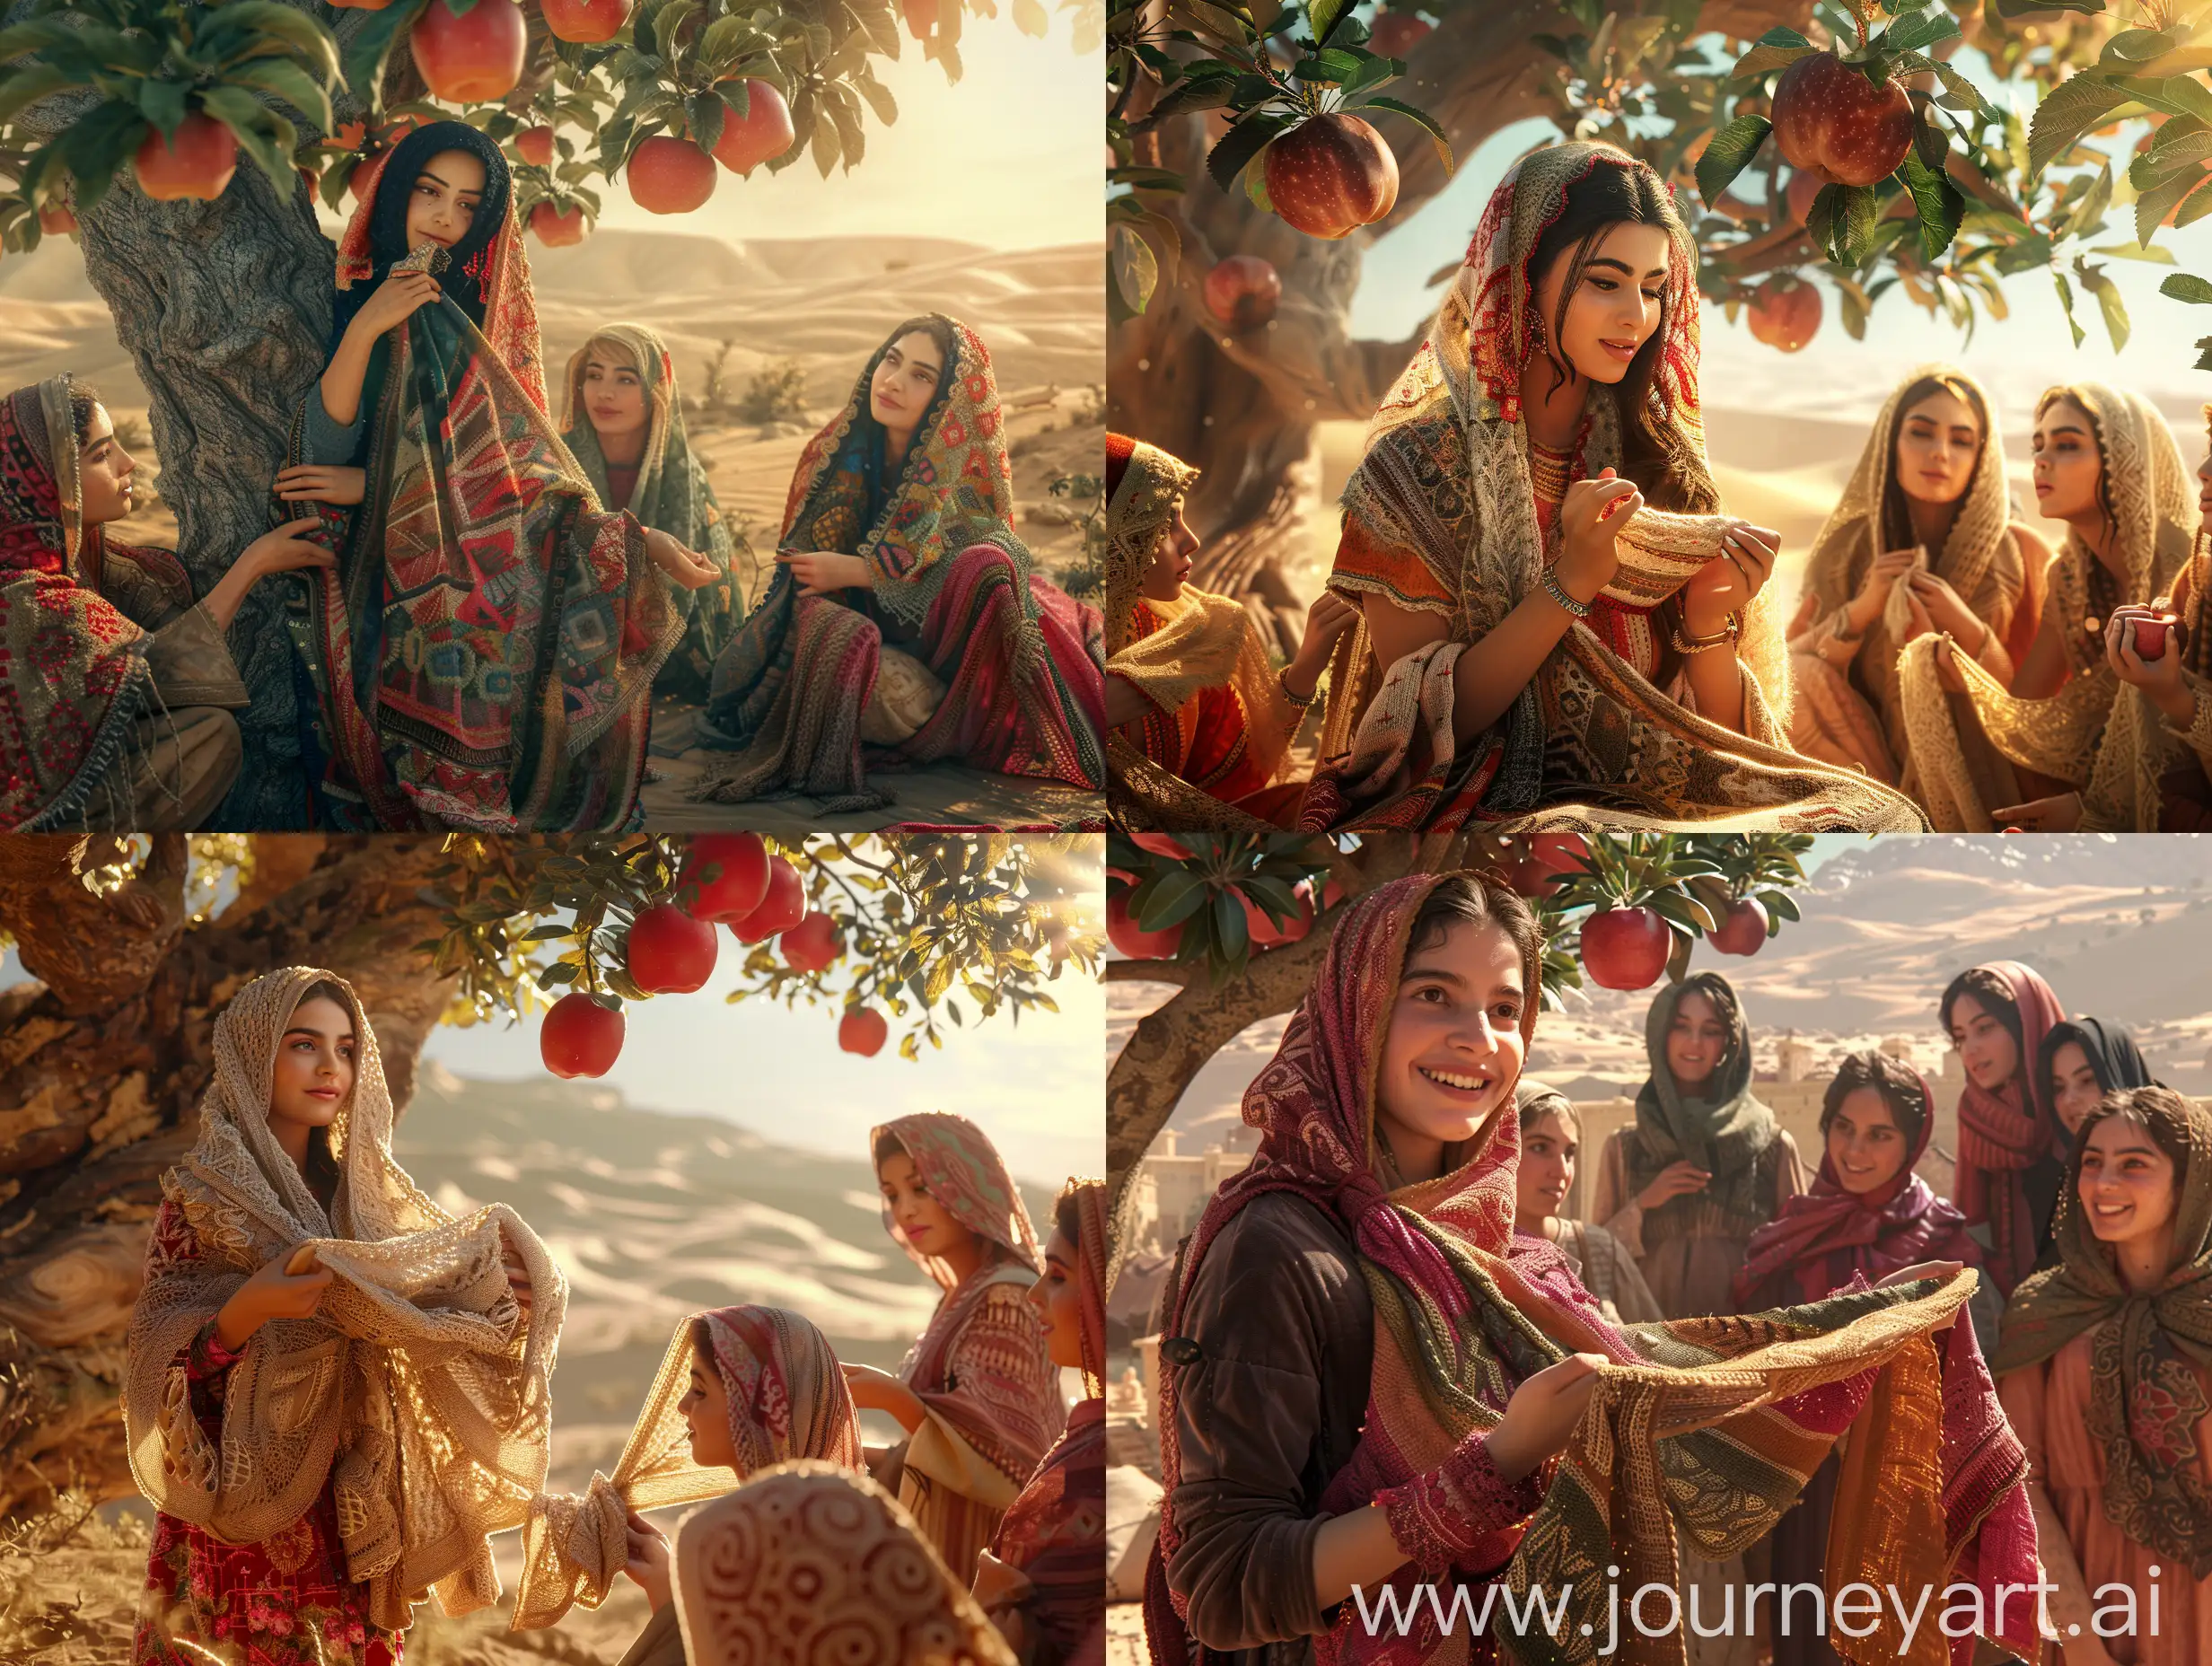 A beautiful young Persian woman, who is happy to have knitted a large number of shawls, proudly shows these shawls to her female friends who are under a giant apple tree and who have also knitted shawls. in a desert, in an ancient civilization, cinematic, epic realism,8K, highly detailed, glamour lighting, backlit